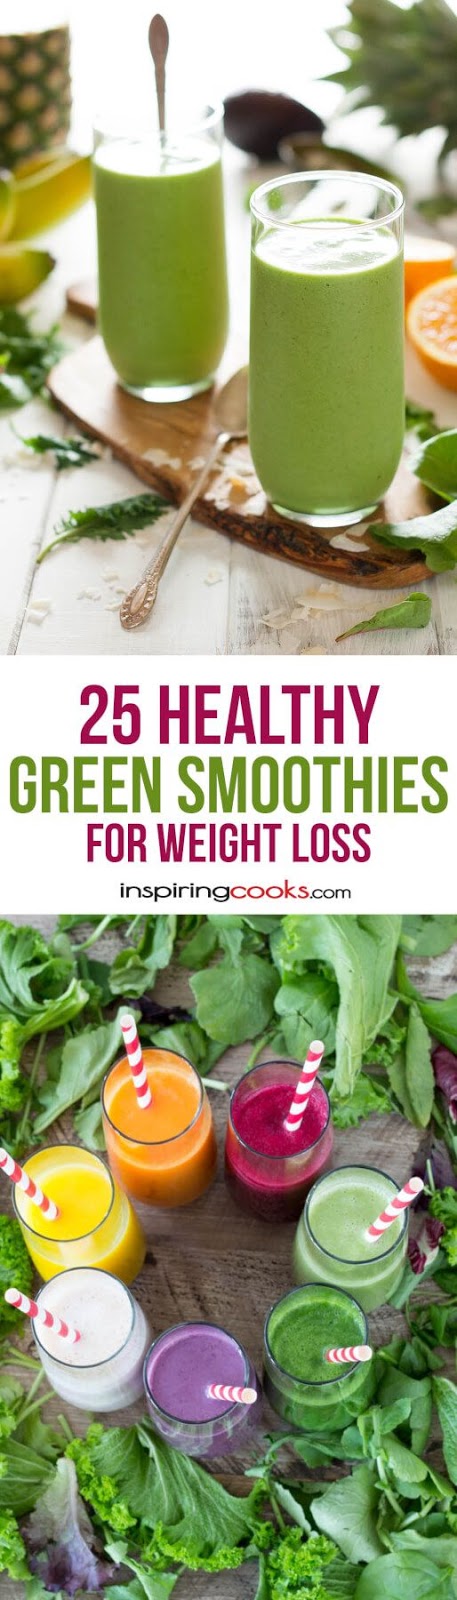 Over 50 Healthy Smoothie Recipes for Weight Loss